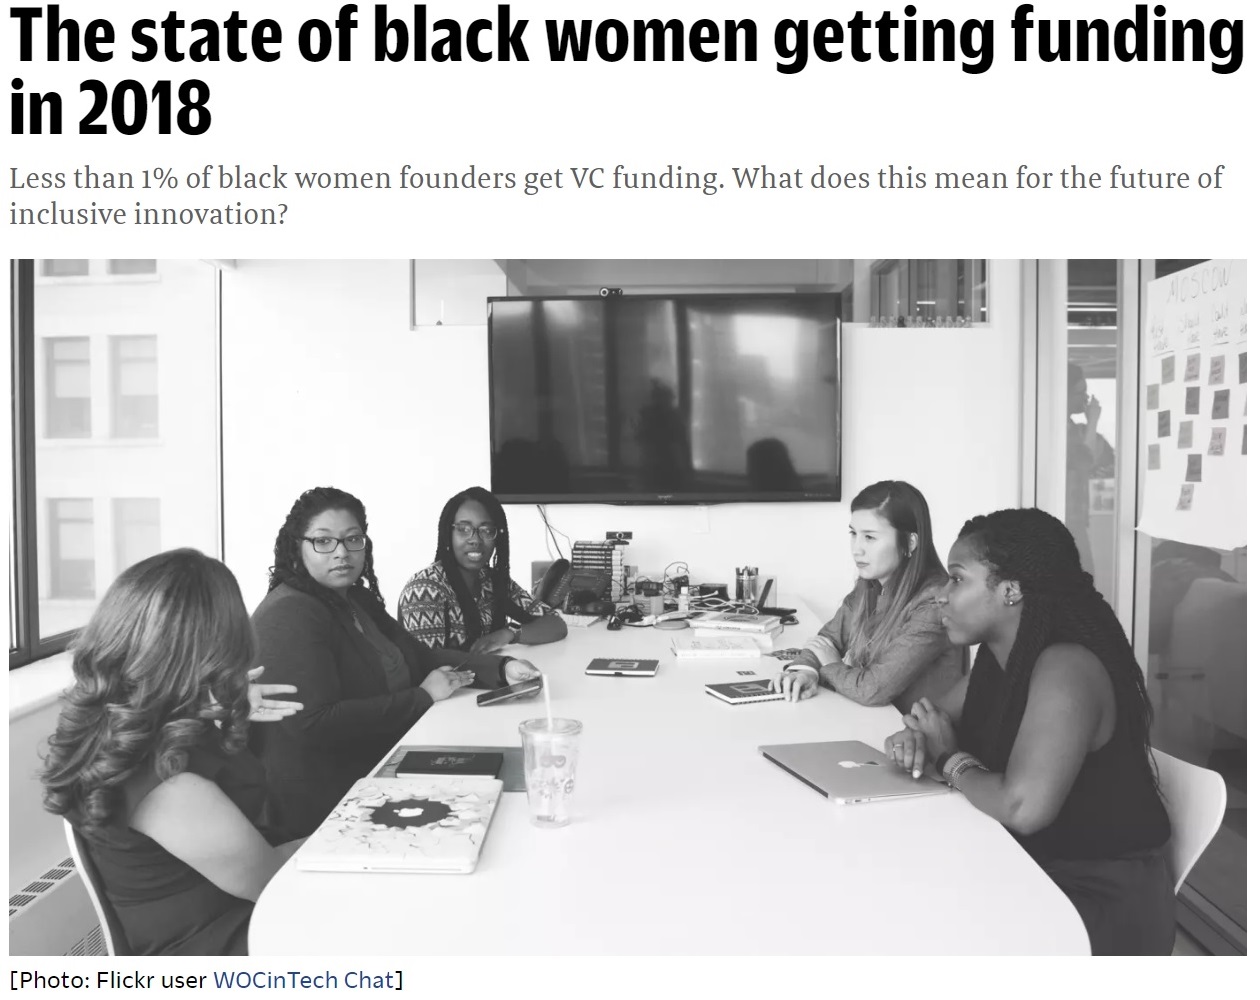 The state of black women getting funding in 2018